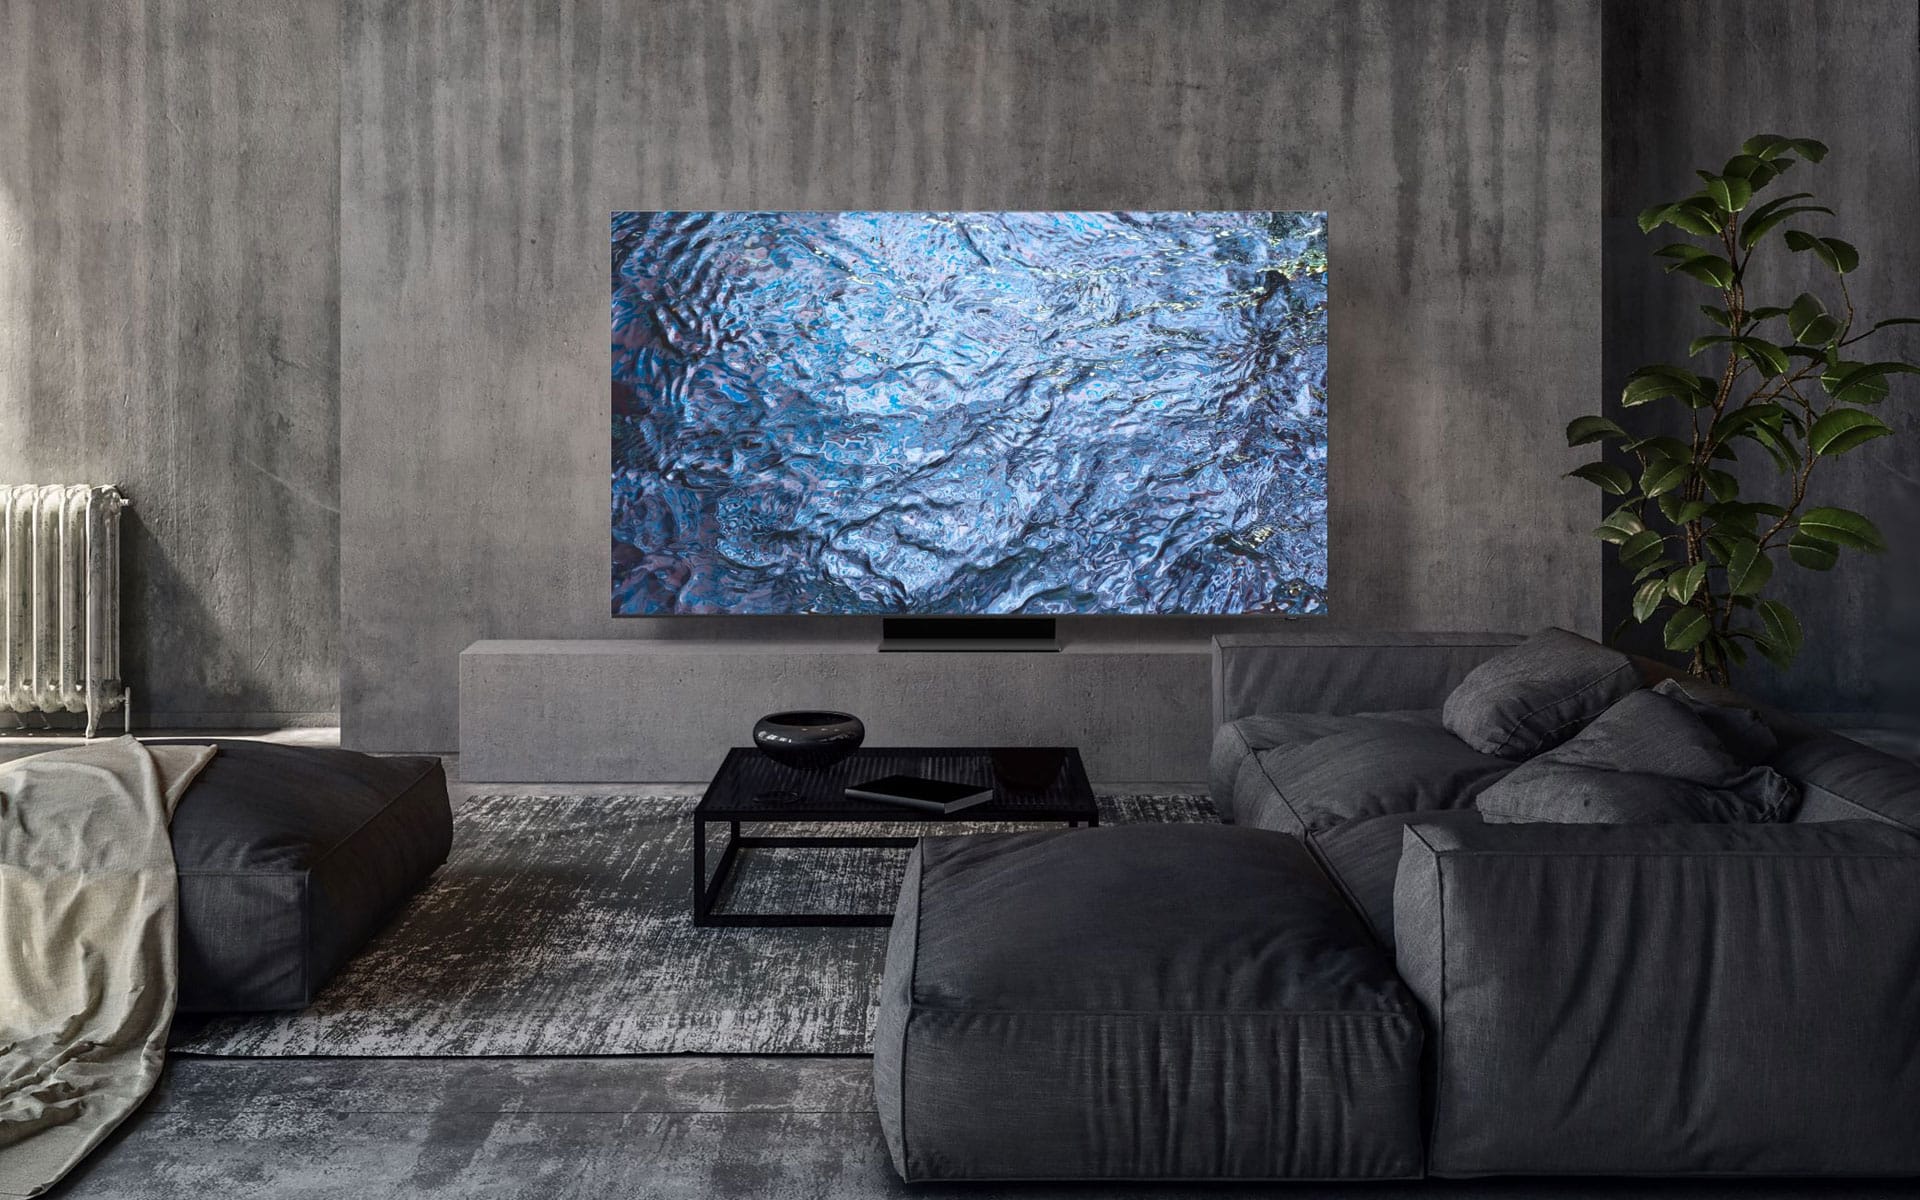 Is 8K TV dying? It's not looking good at CES 2023